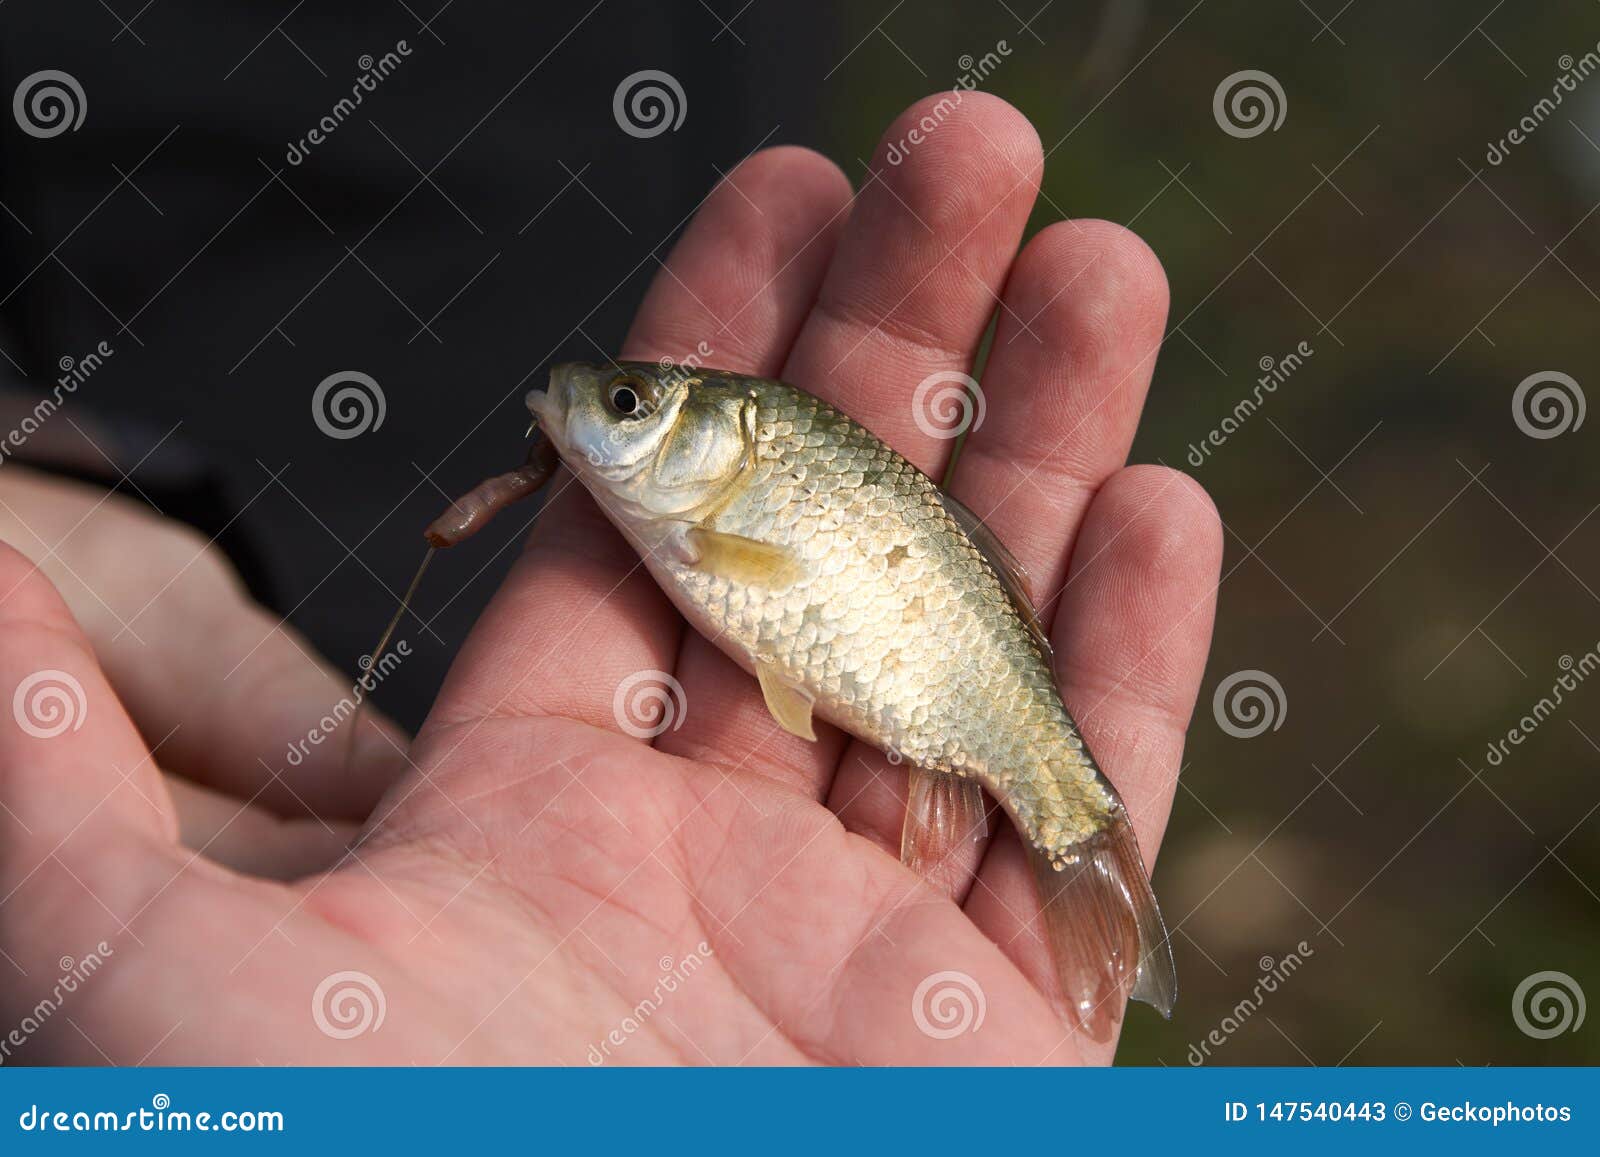 https://thumbs.dreamstime.com/z/fisherman-holding-caught-fish-hand-close-up-small-sharp-hook-fishing-outdoors-147540443.jpg